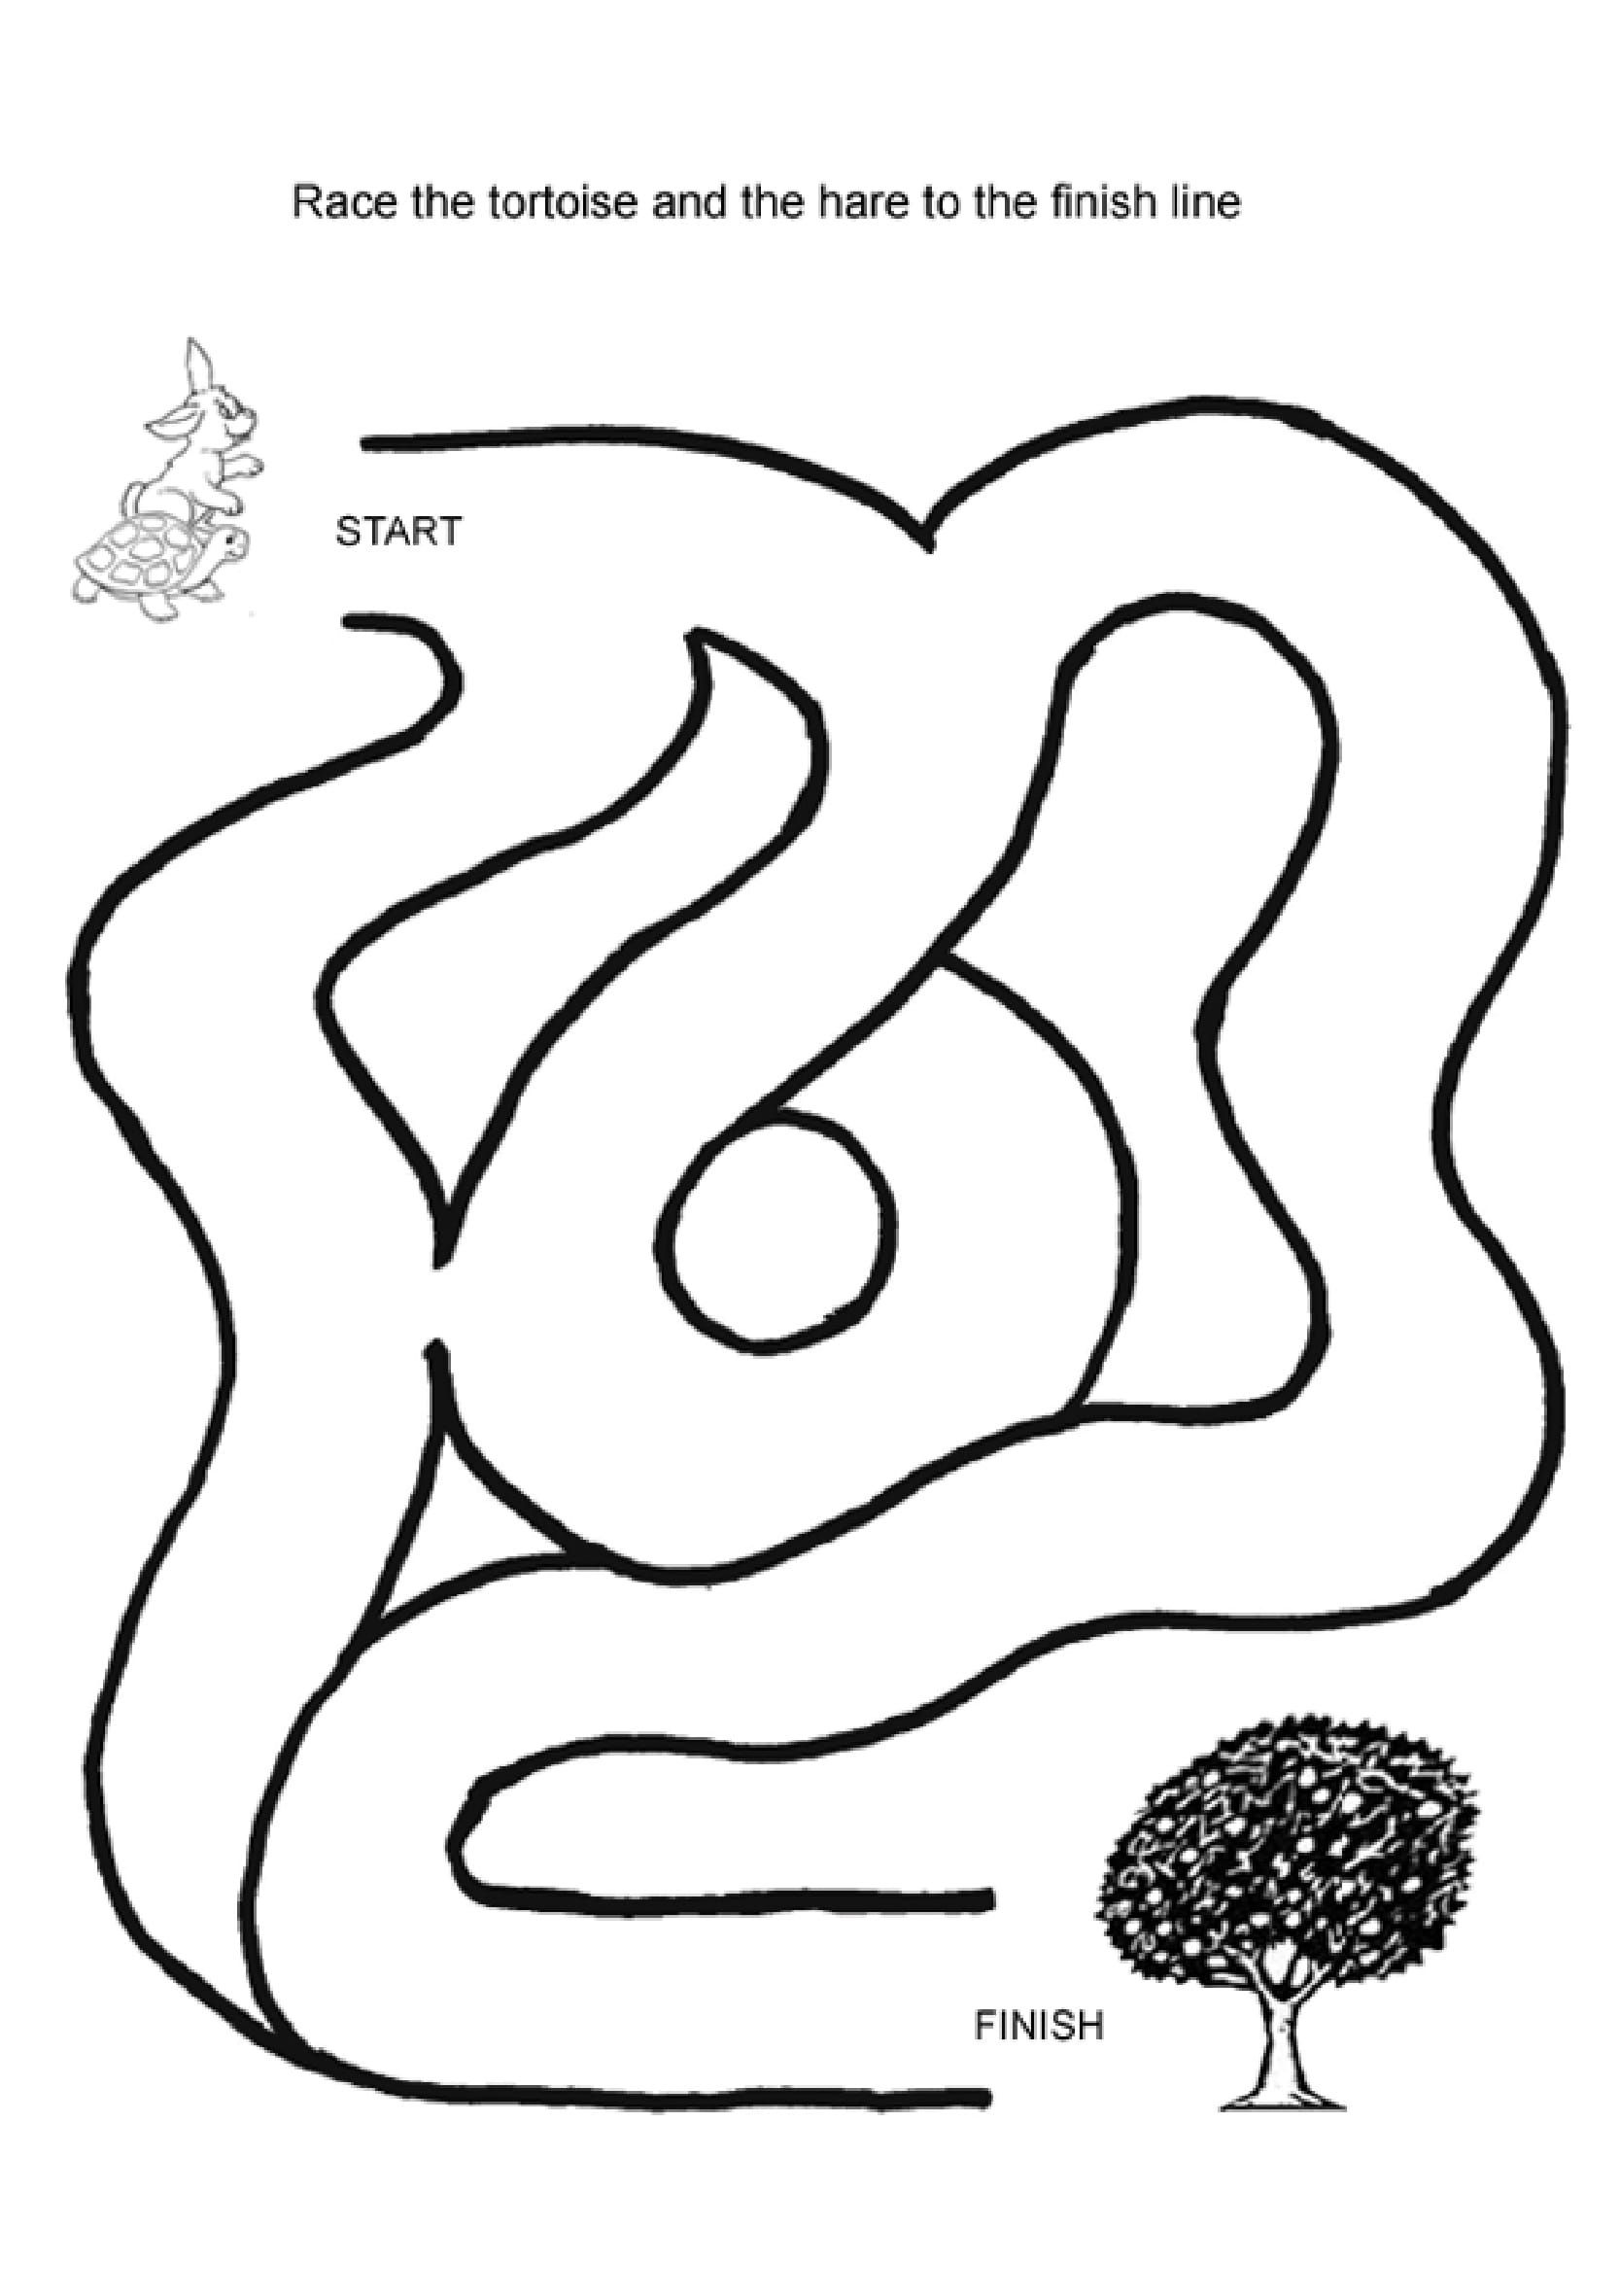 easy-mazes-printable-mazes-for-kids-best-coloring-pages-for-kids